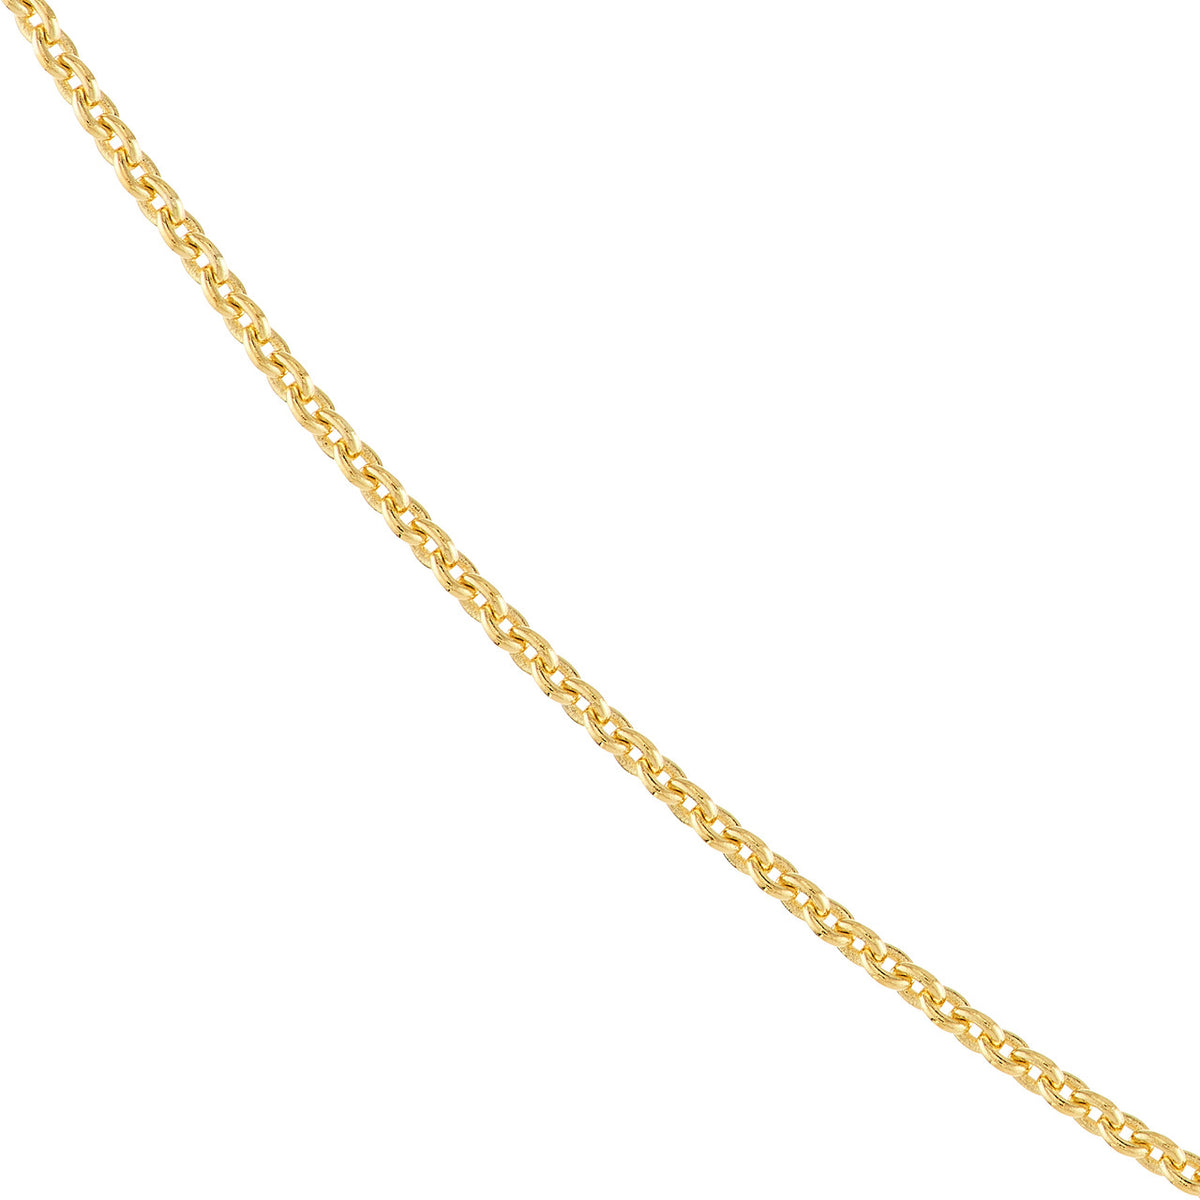 14K Yellow Gold, White Gold or Rose Gold 0.7mm Adjustable Cable Chain Necklace with Spring Ring